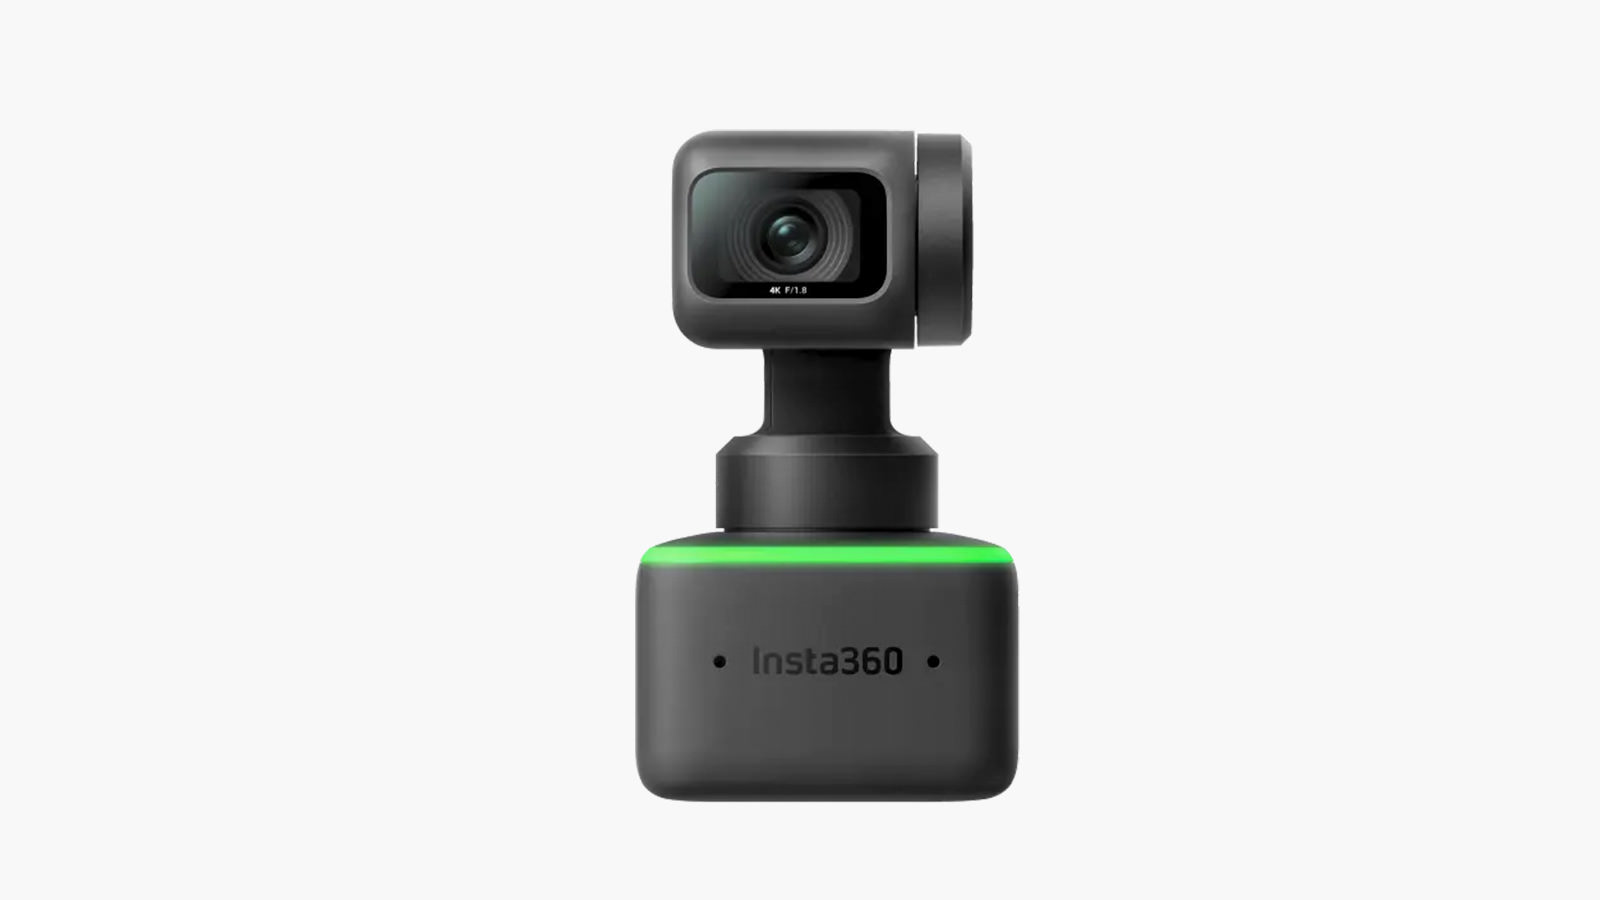 The Insta360 Link Is Not Your Average Webcam - IMBOLDN